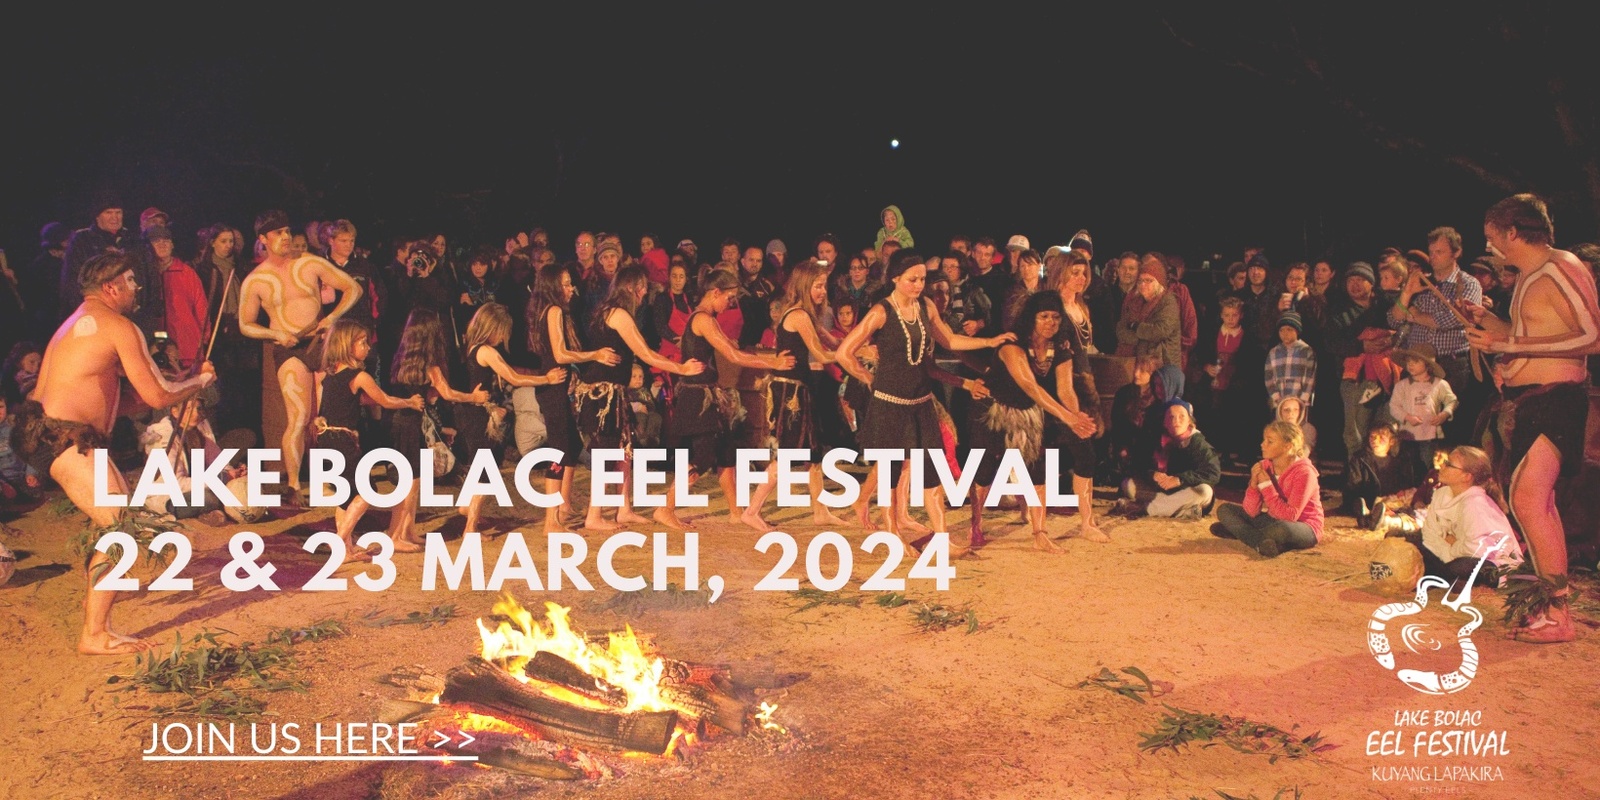 Banner image for Lake Bolac Eel Festival - 22 & 23 March, 2024